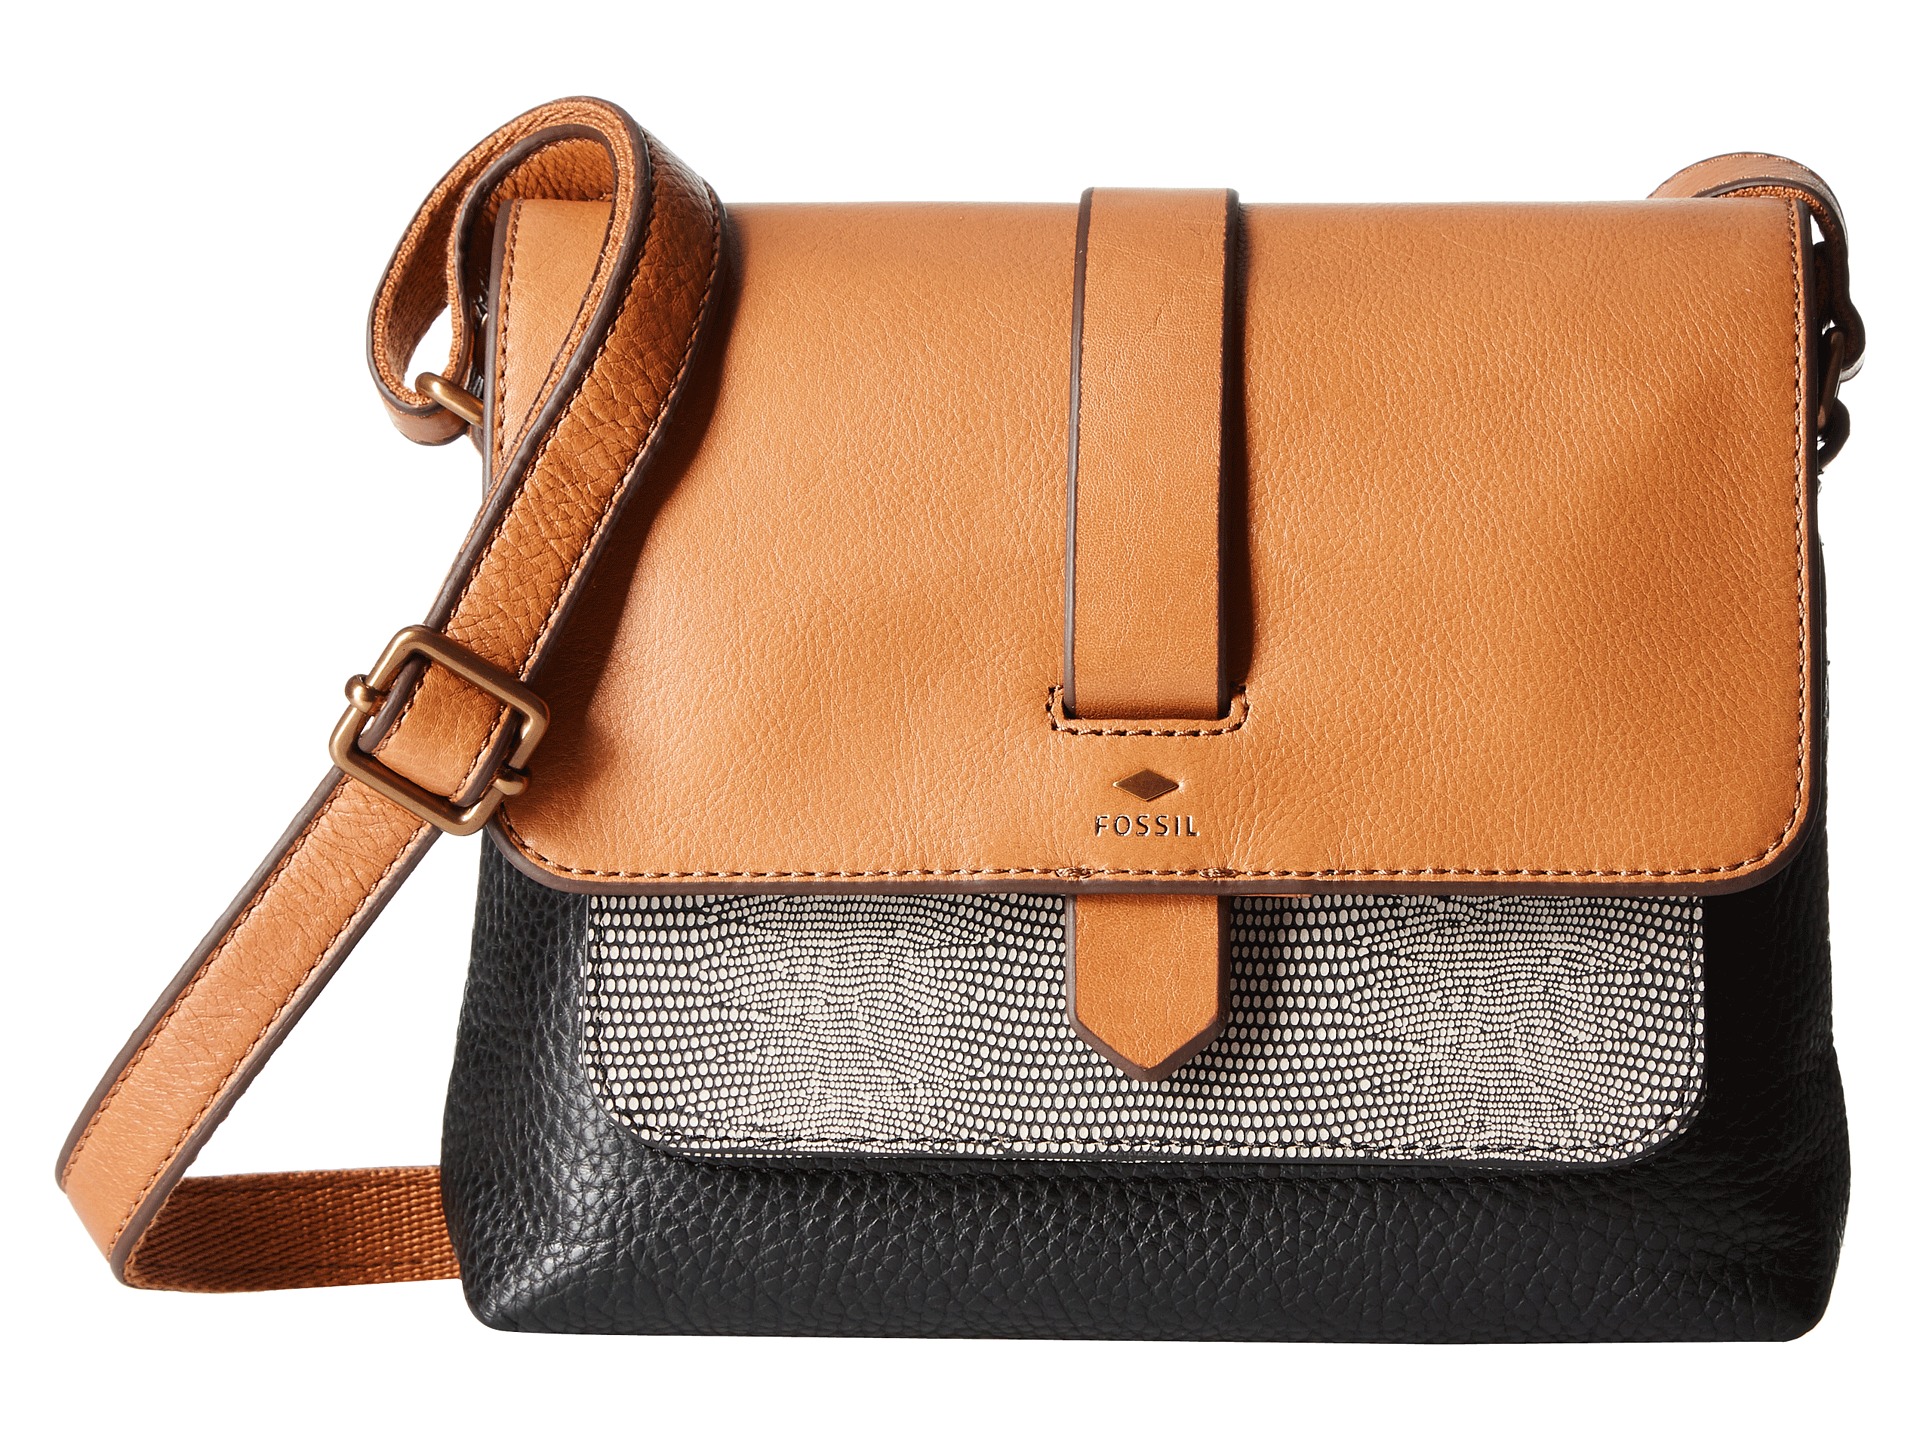 Fossil Kinley Small Crossbody - www.lvbagssale.com Free Shipping BOTH Ways